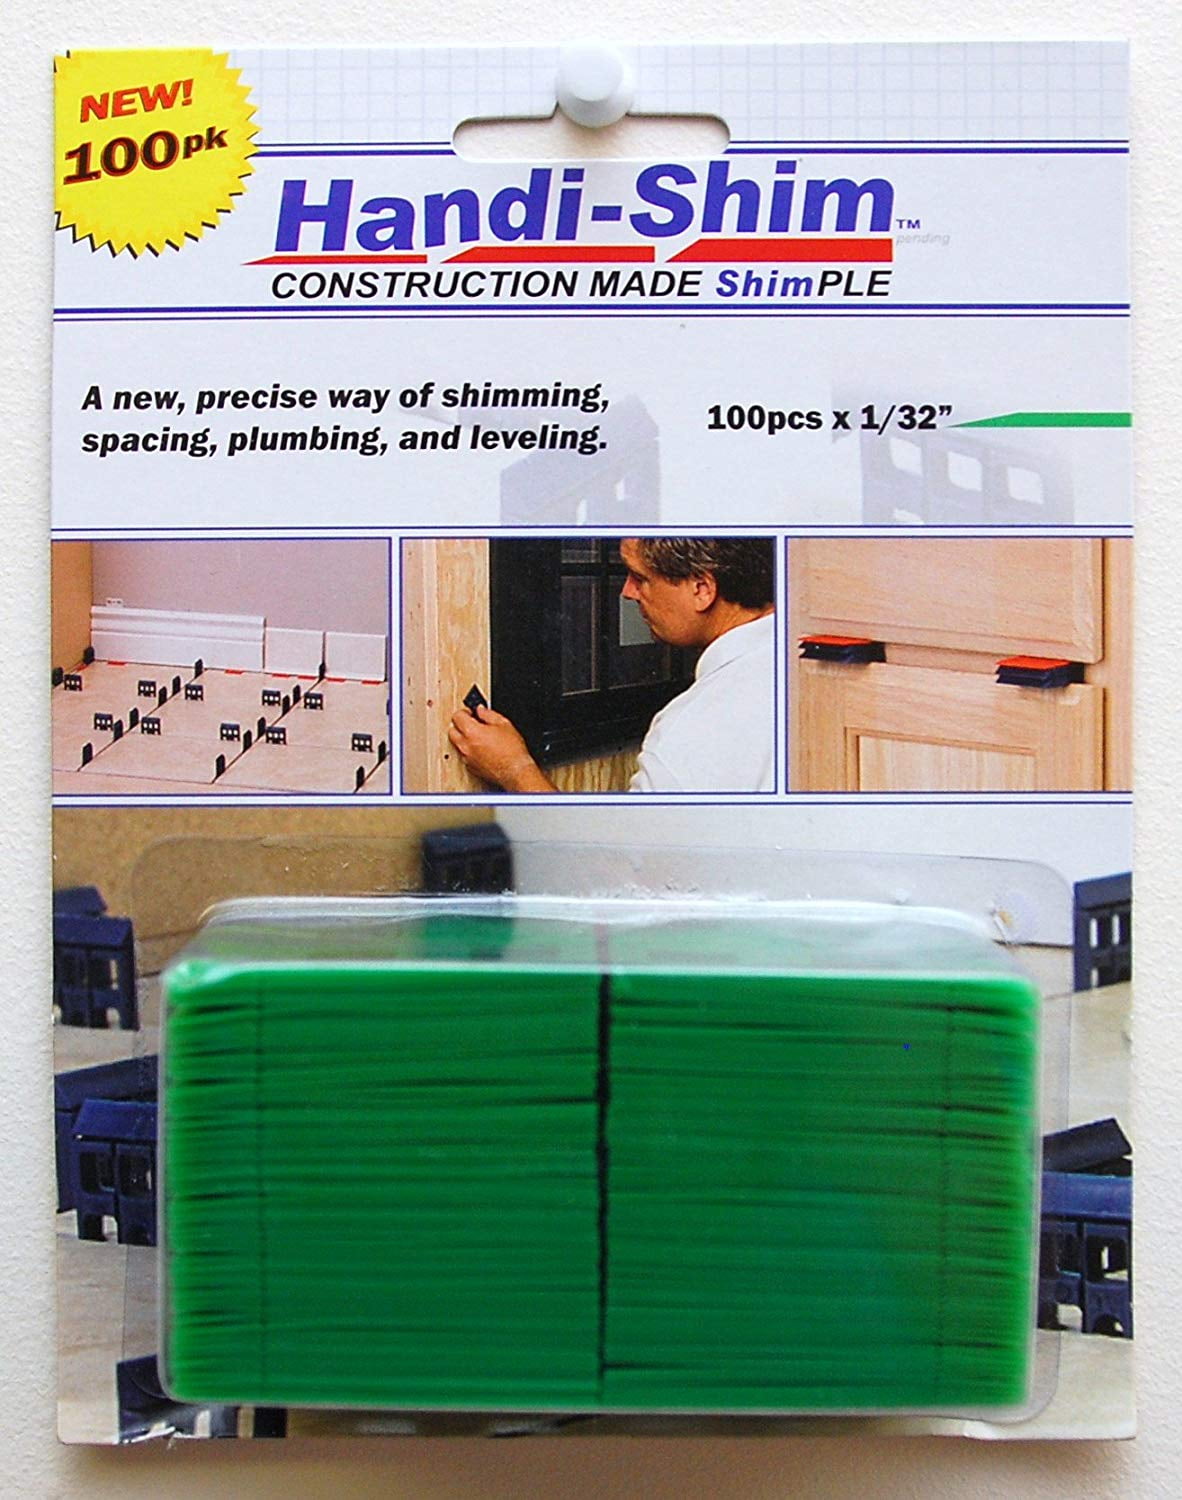 Details about   SHIMS Handi-Shim Plastic Construction Shims/Spacers 1/32 Inch Green 100 Pack 